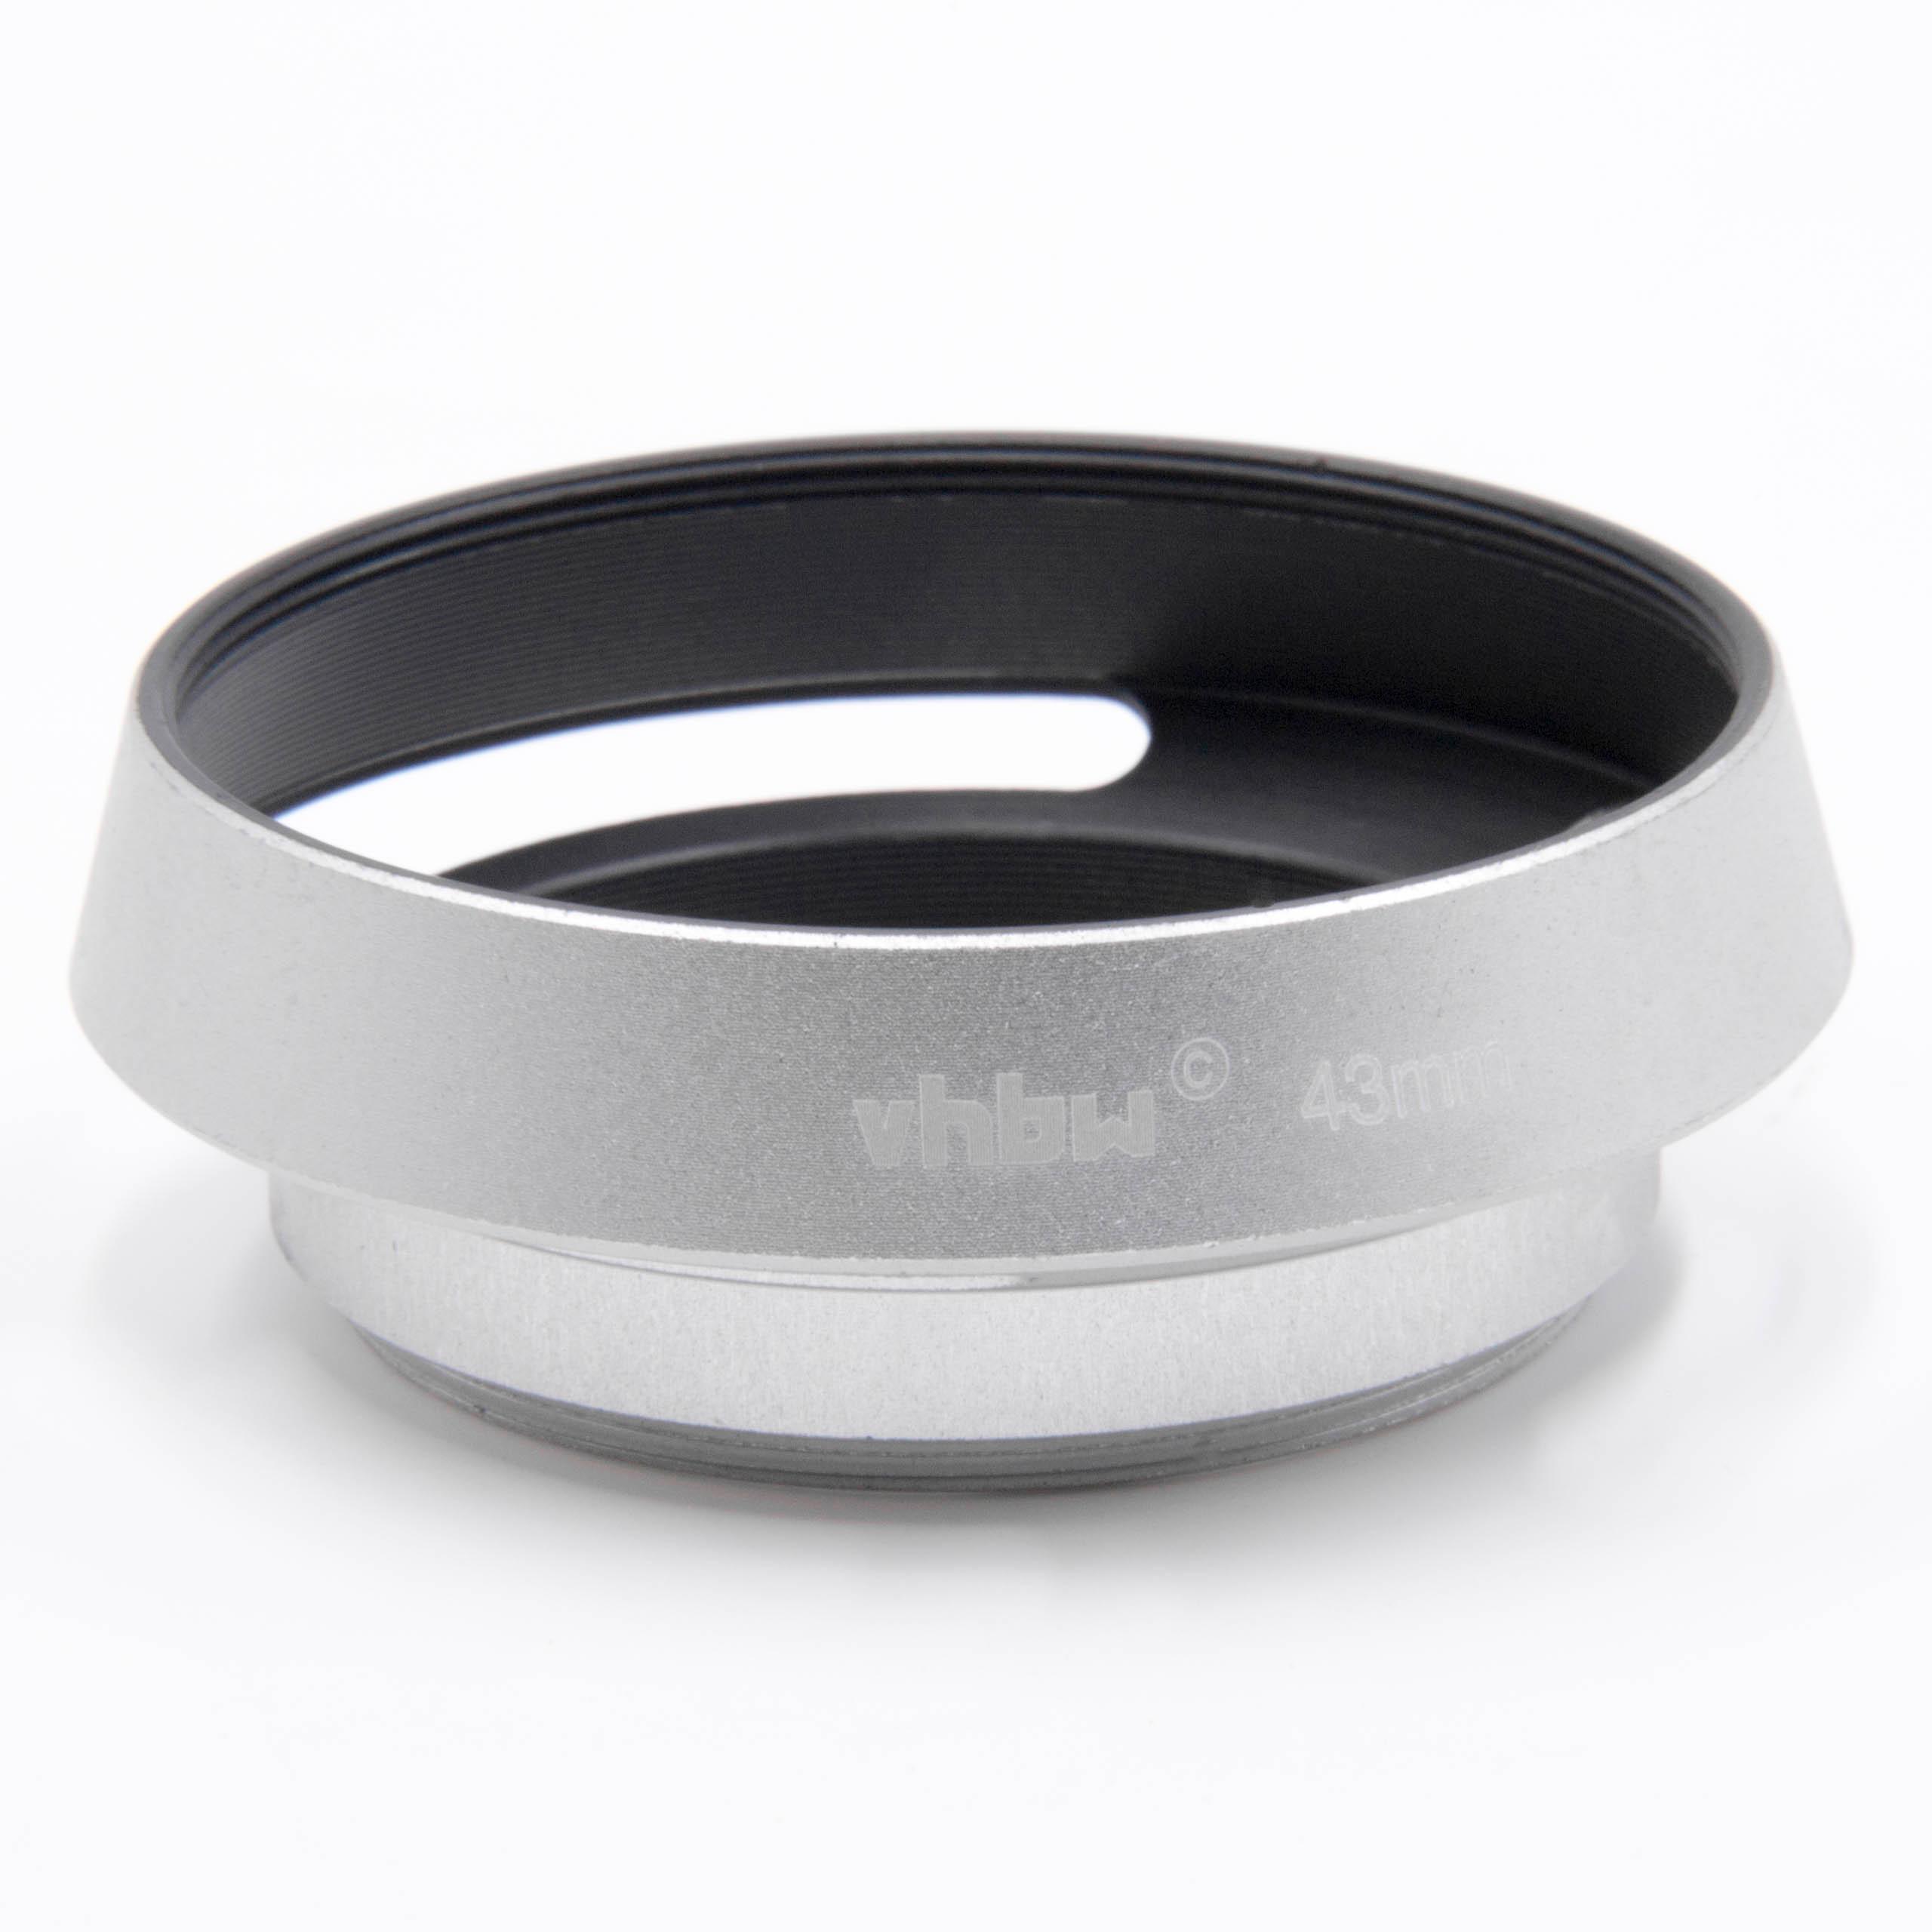 Lens Hood suitable for 43mm Lens - Lens Shade Silver, Round